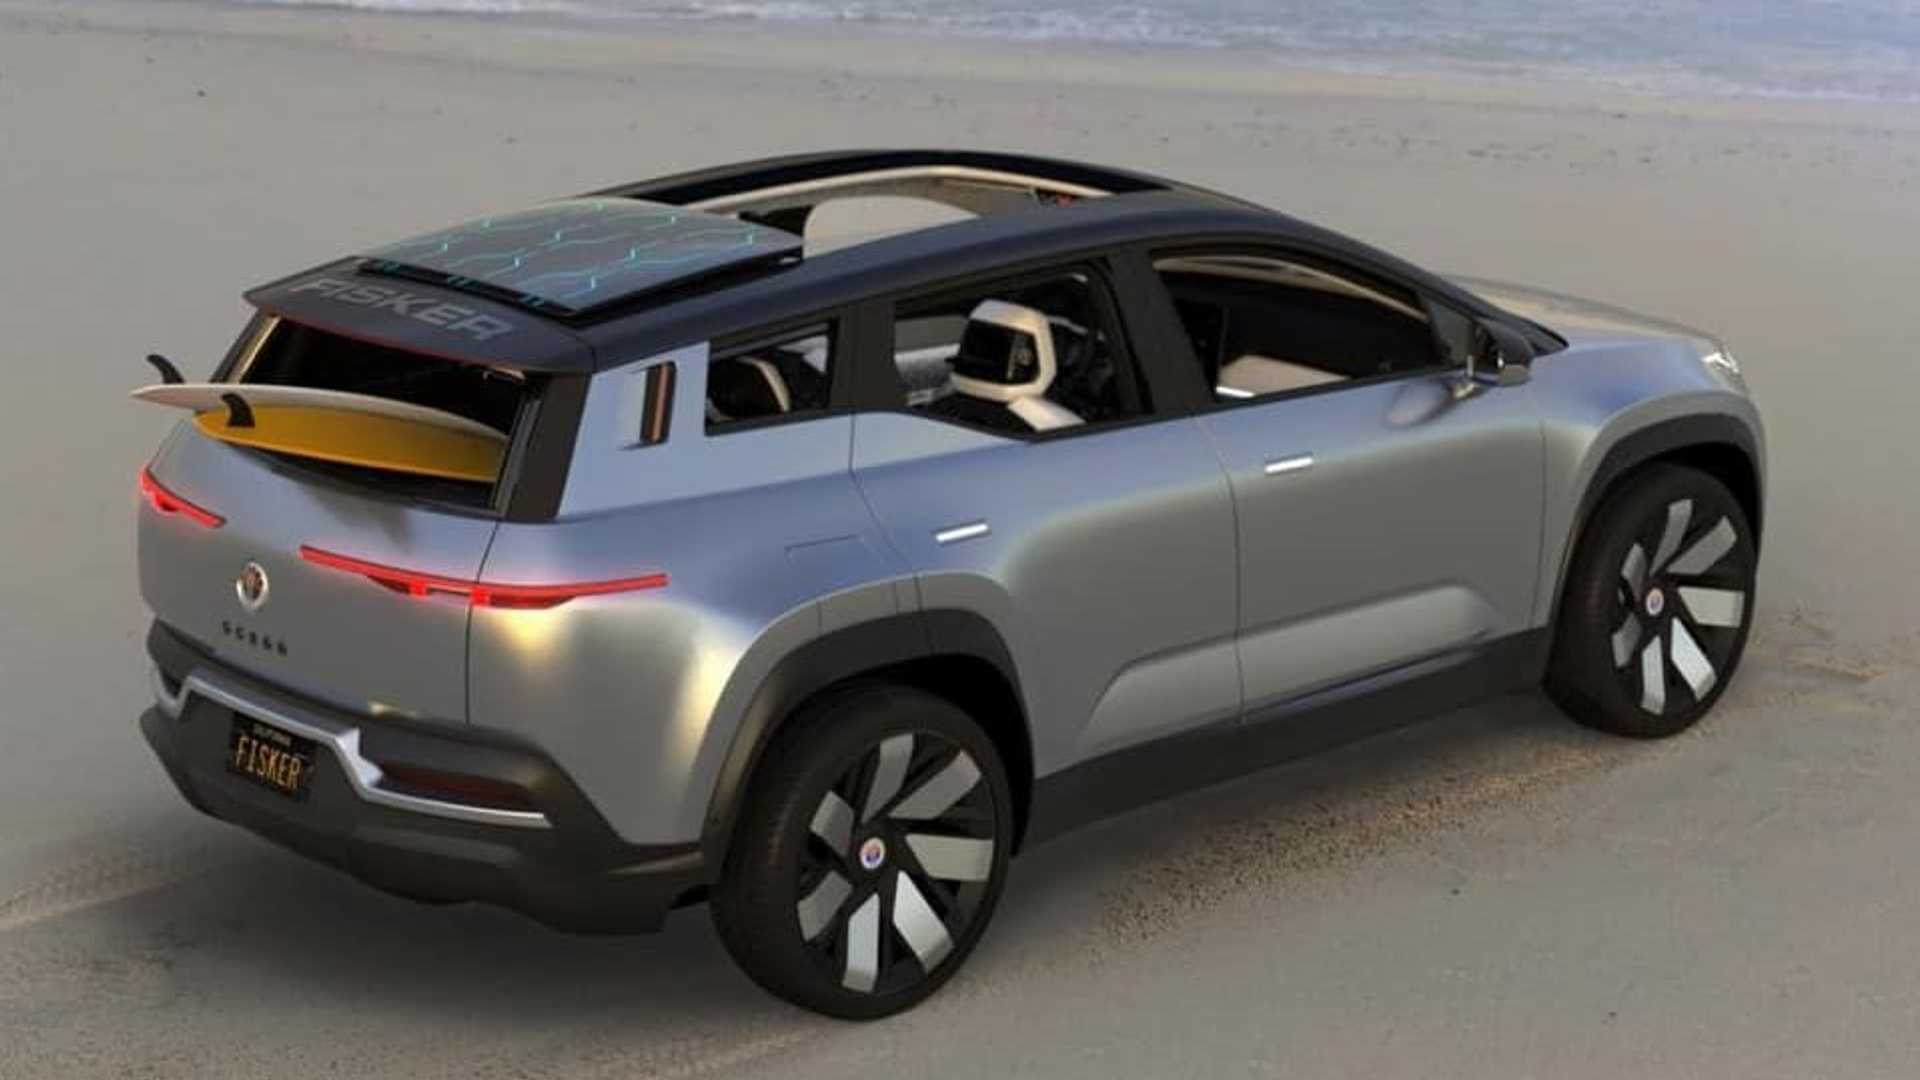 2022 Fisker Ocean Electric SUV Dubbed "World's Most Sustainable Vehicle